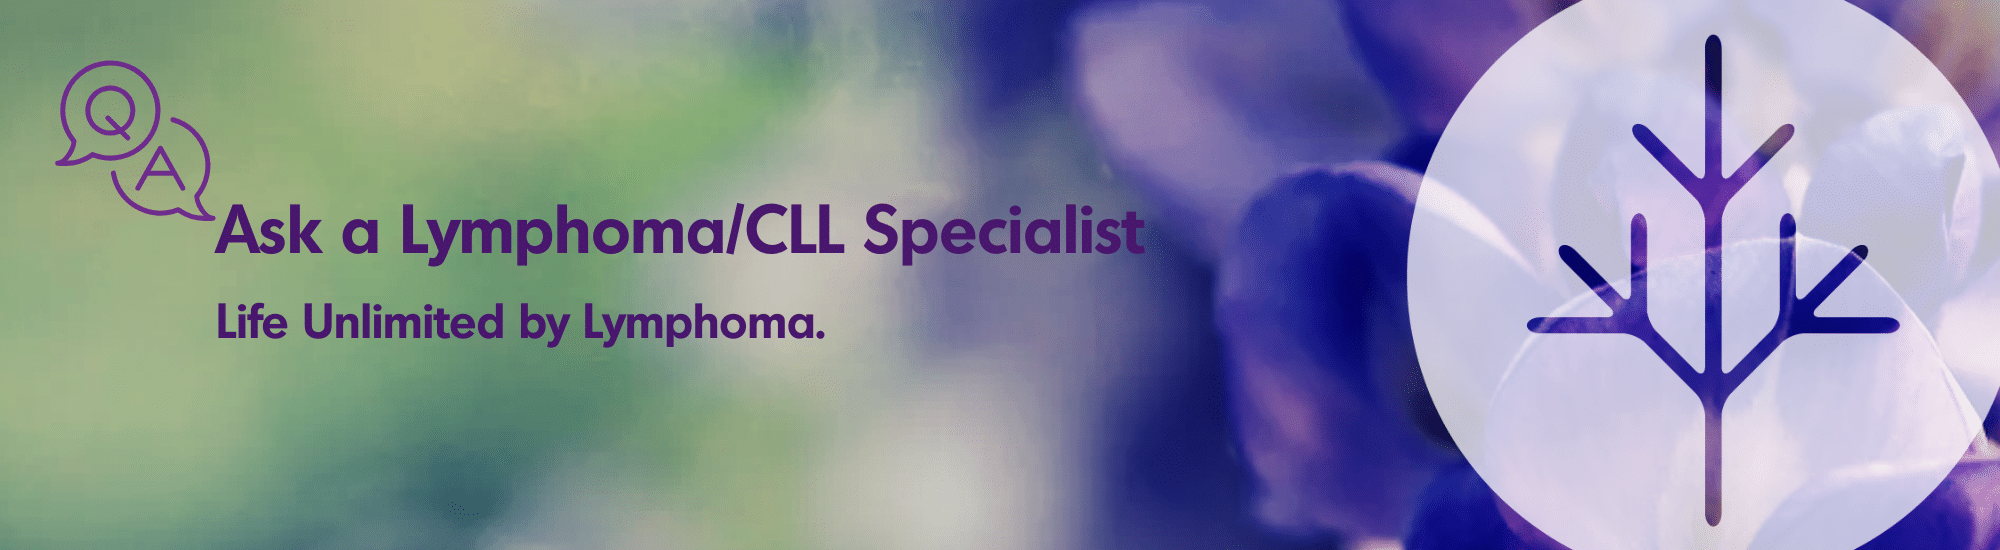 Ask a Lymphoma/CLL Specialist